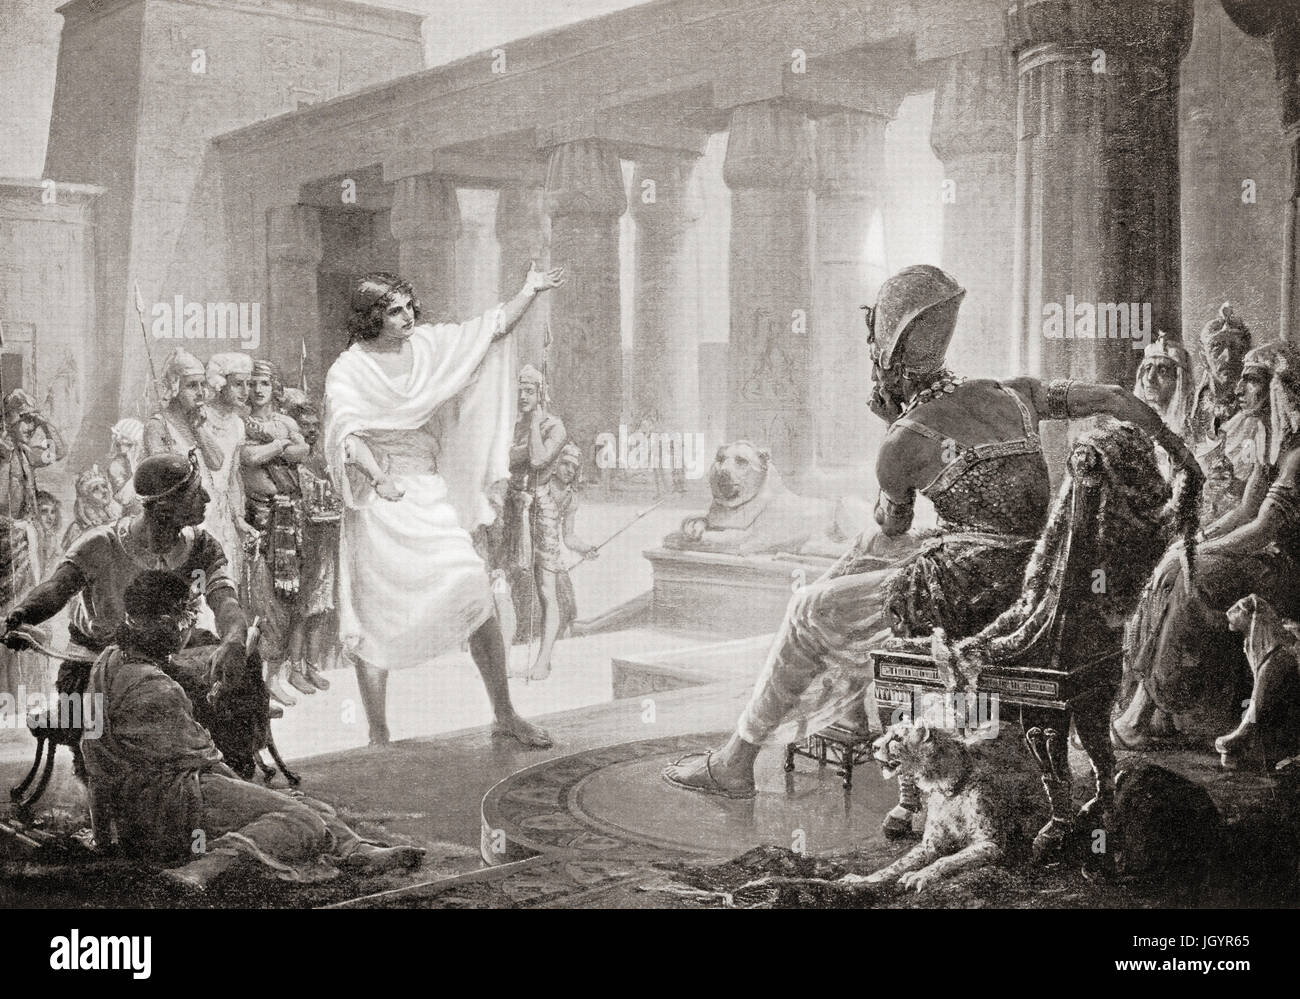 Joseph interpreting the Pharaohs' dreams.  Joseph, sold into slavery by his jealous brothers, he rose to become vizier, the second most powerful man in Egypt after interpreting the Pharaohs' dreams.  After the painting by Margaret Dovaston (1884-1954).  From Hutchinson's History of the Nations, published 1915. Stock Photo